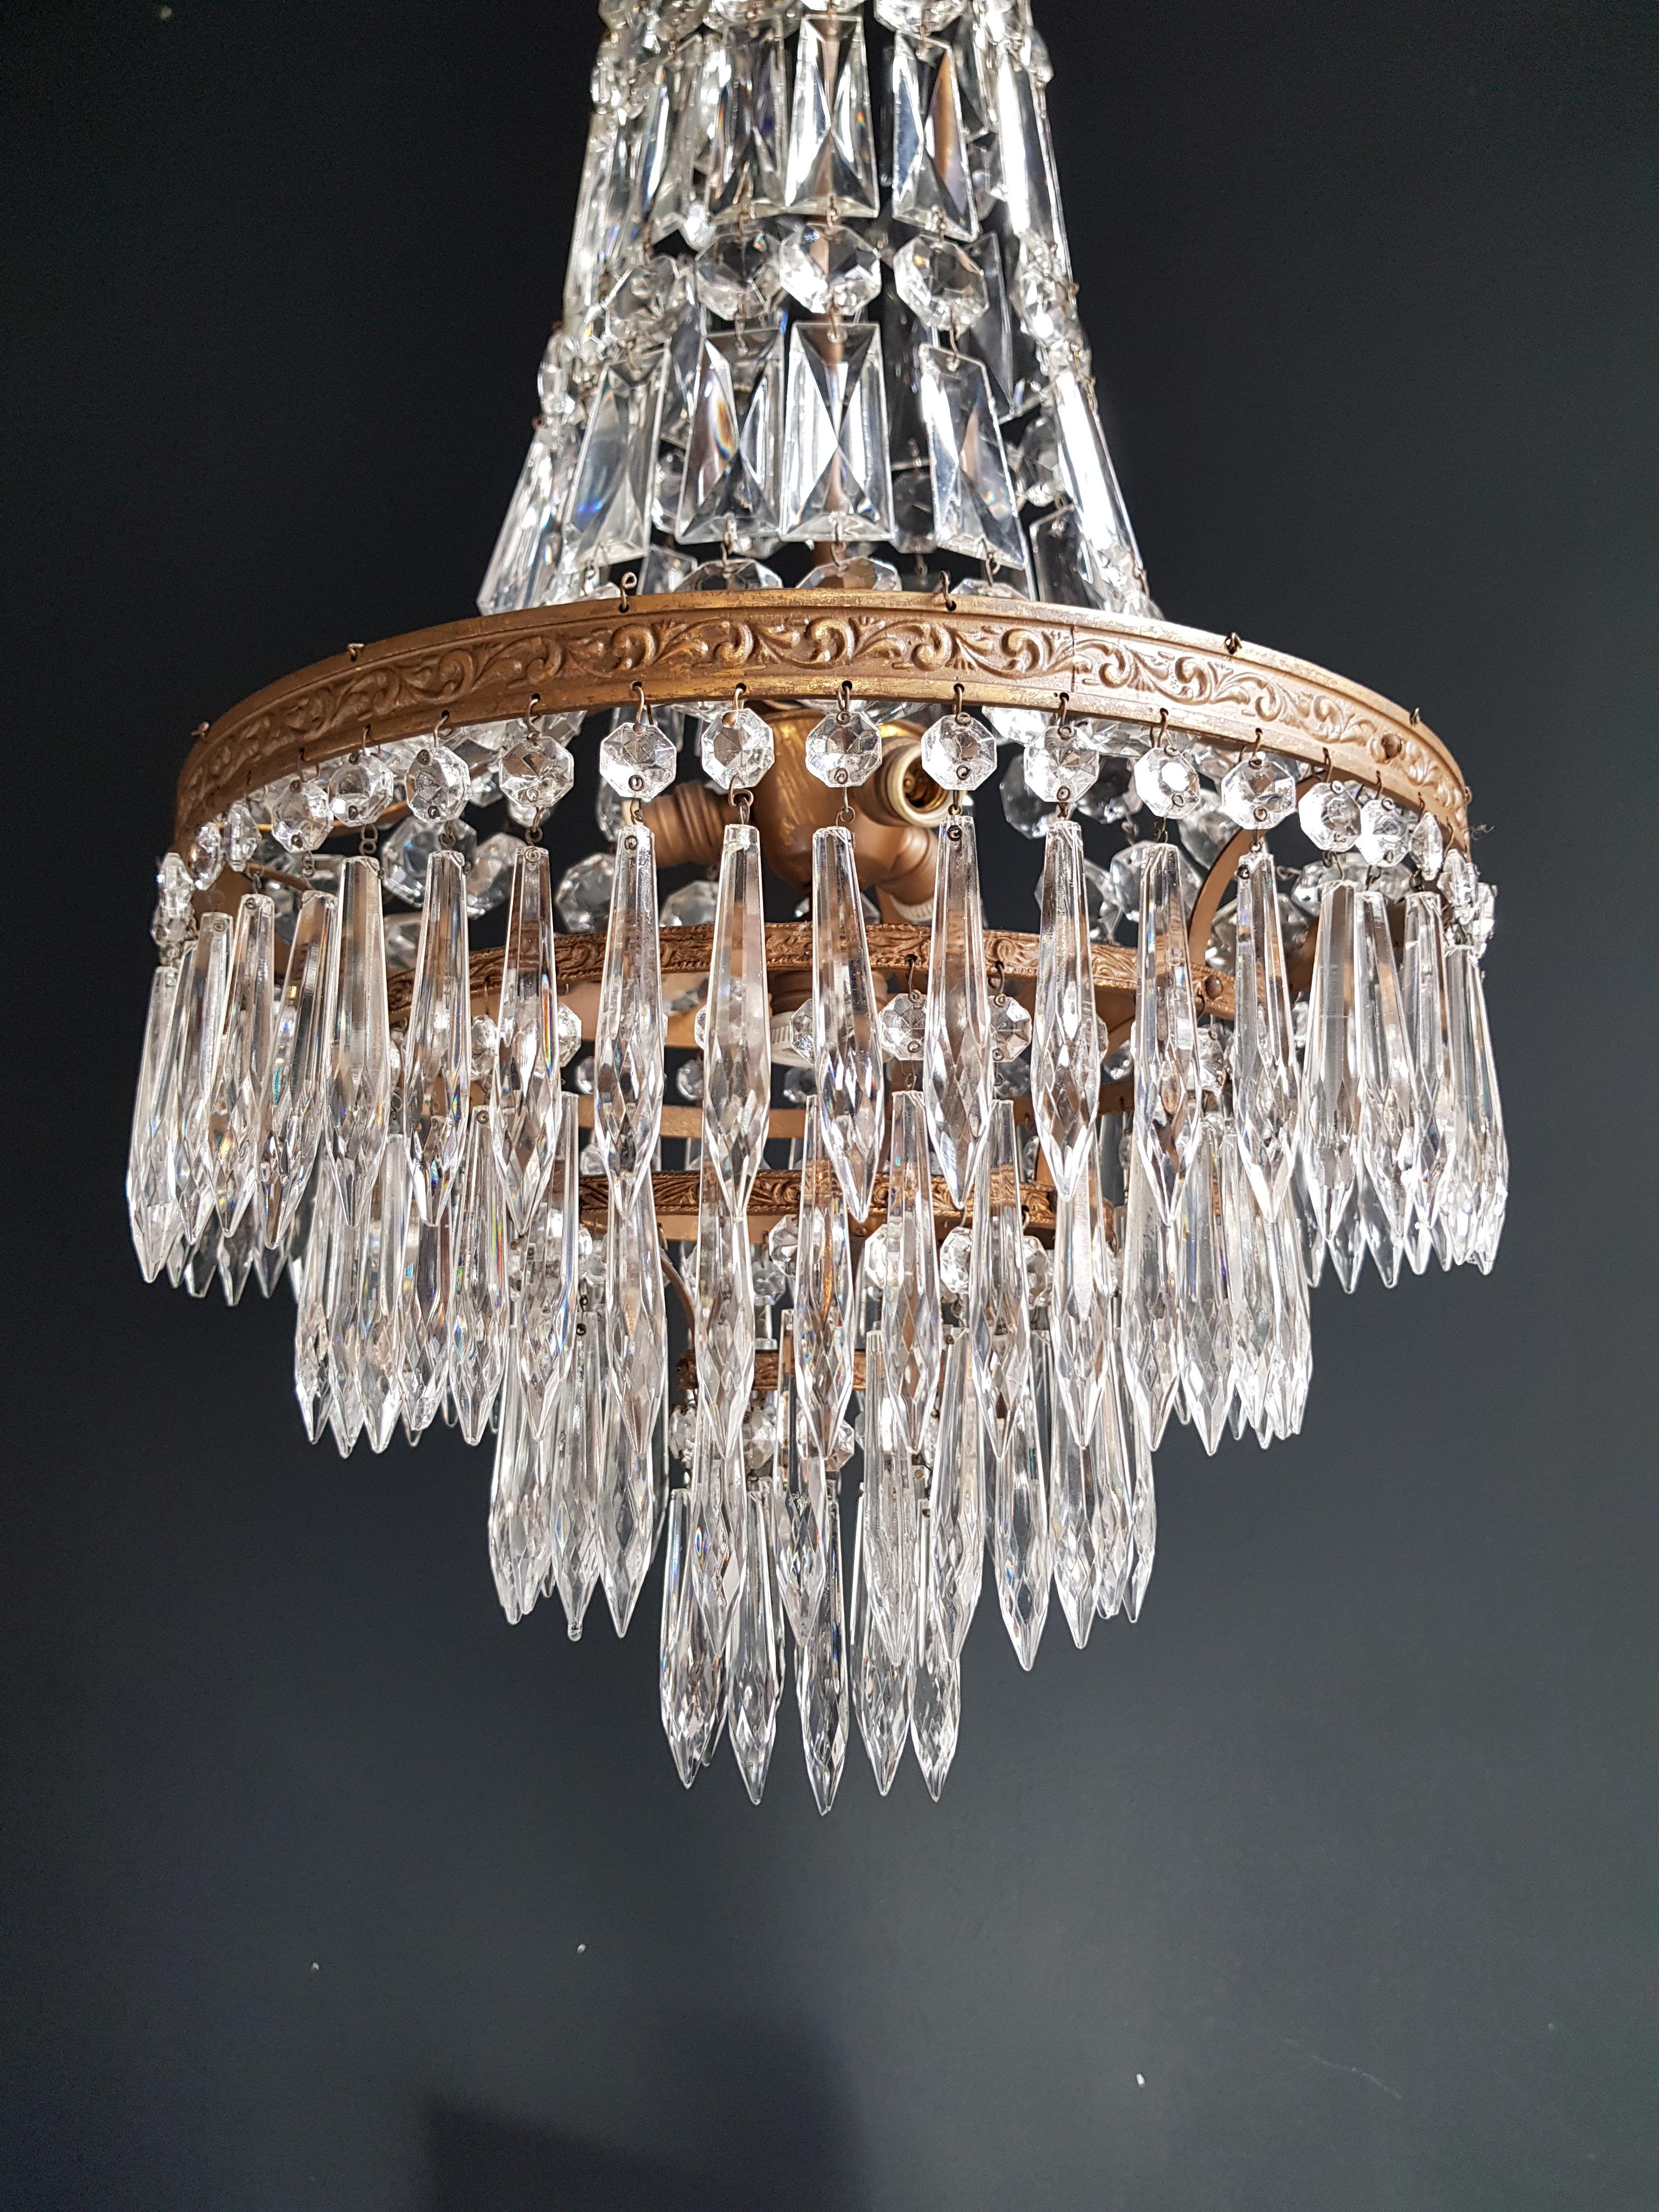 Exquisite Antique Empire Crystal Chandelier - A Fine Brass Sac à Perles Design

Presenting a true masterpiece: an antique Empire crystal chandelier adorned with delicate brass and the timeless elegance of a sac à perles design.

Expert Restoration